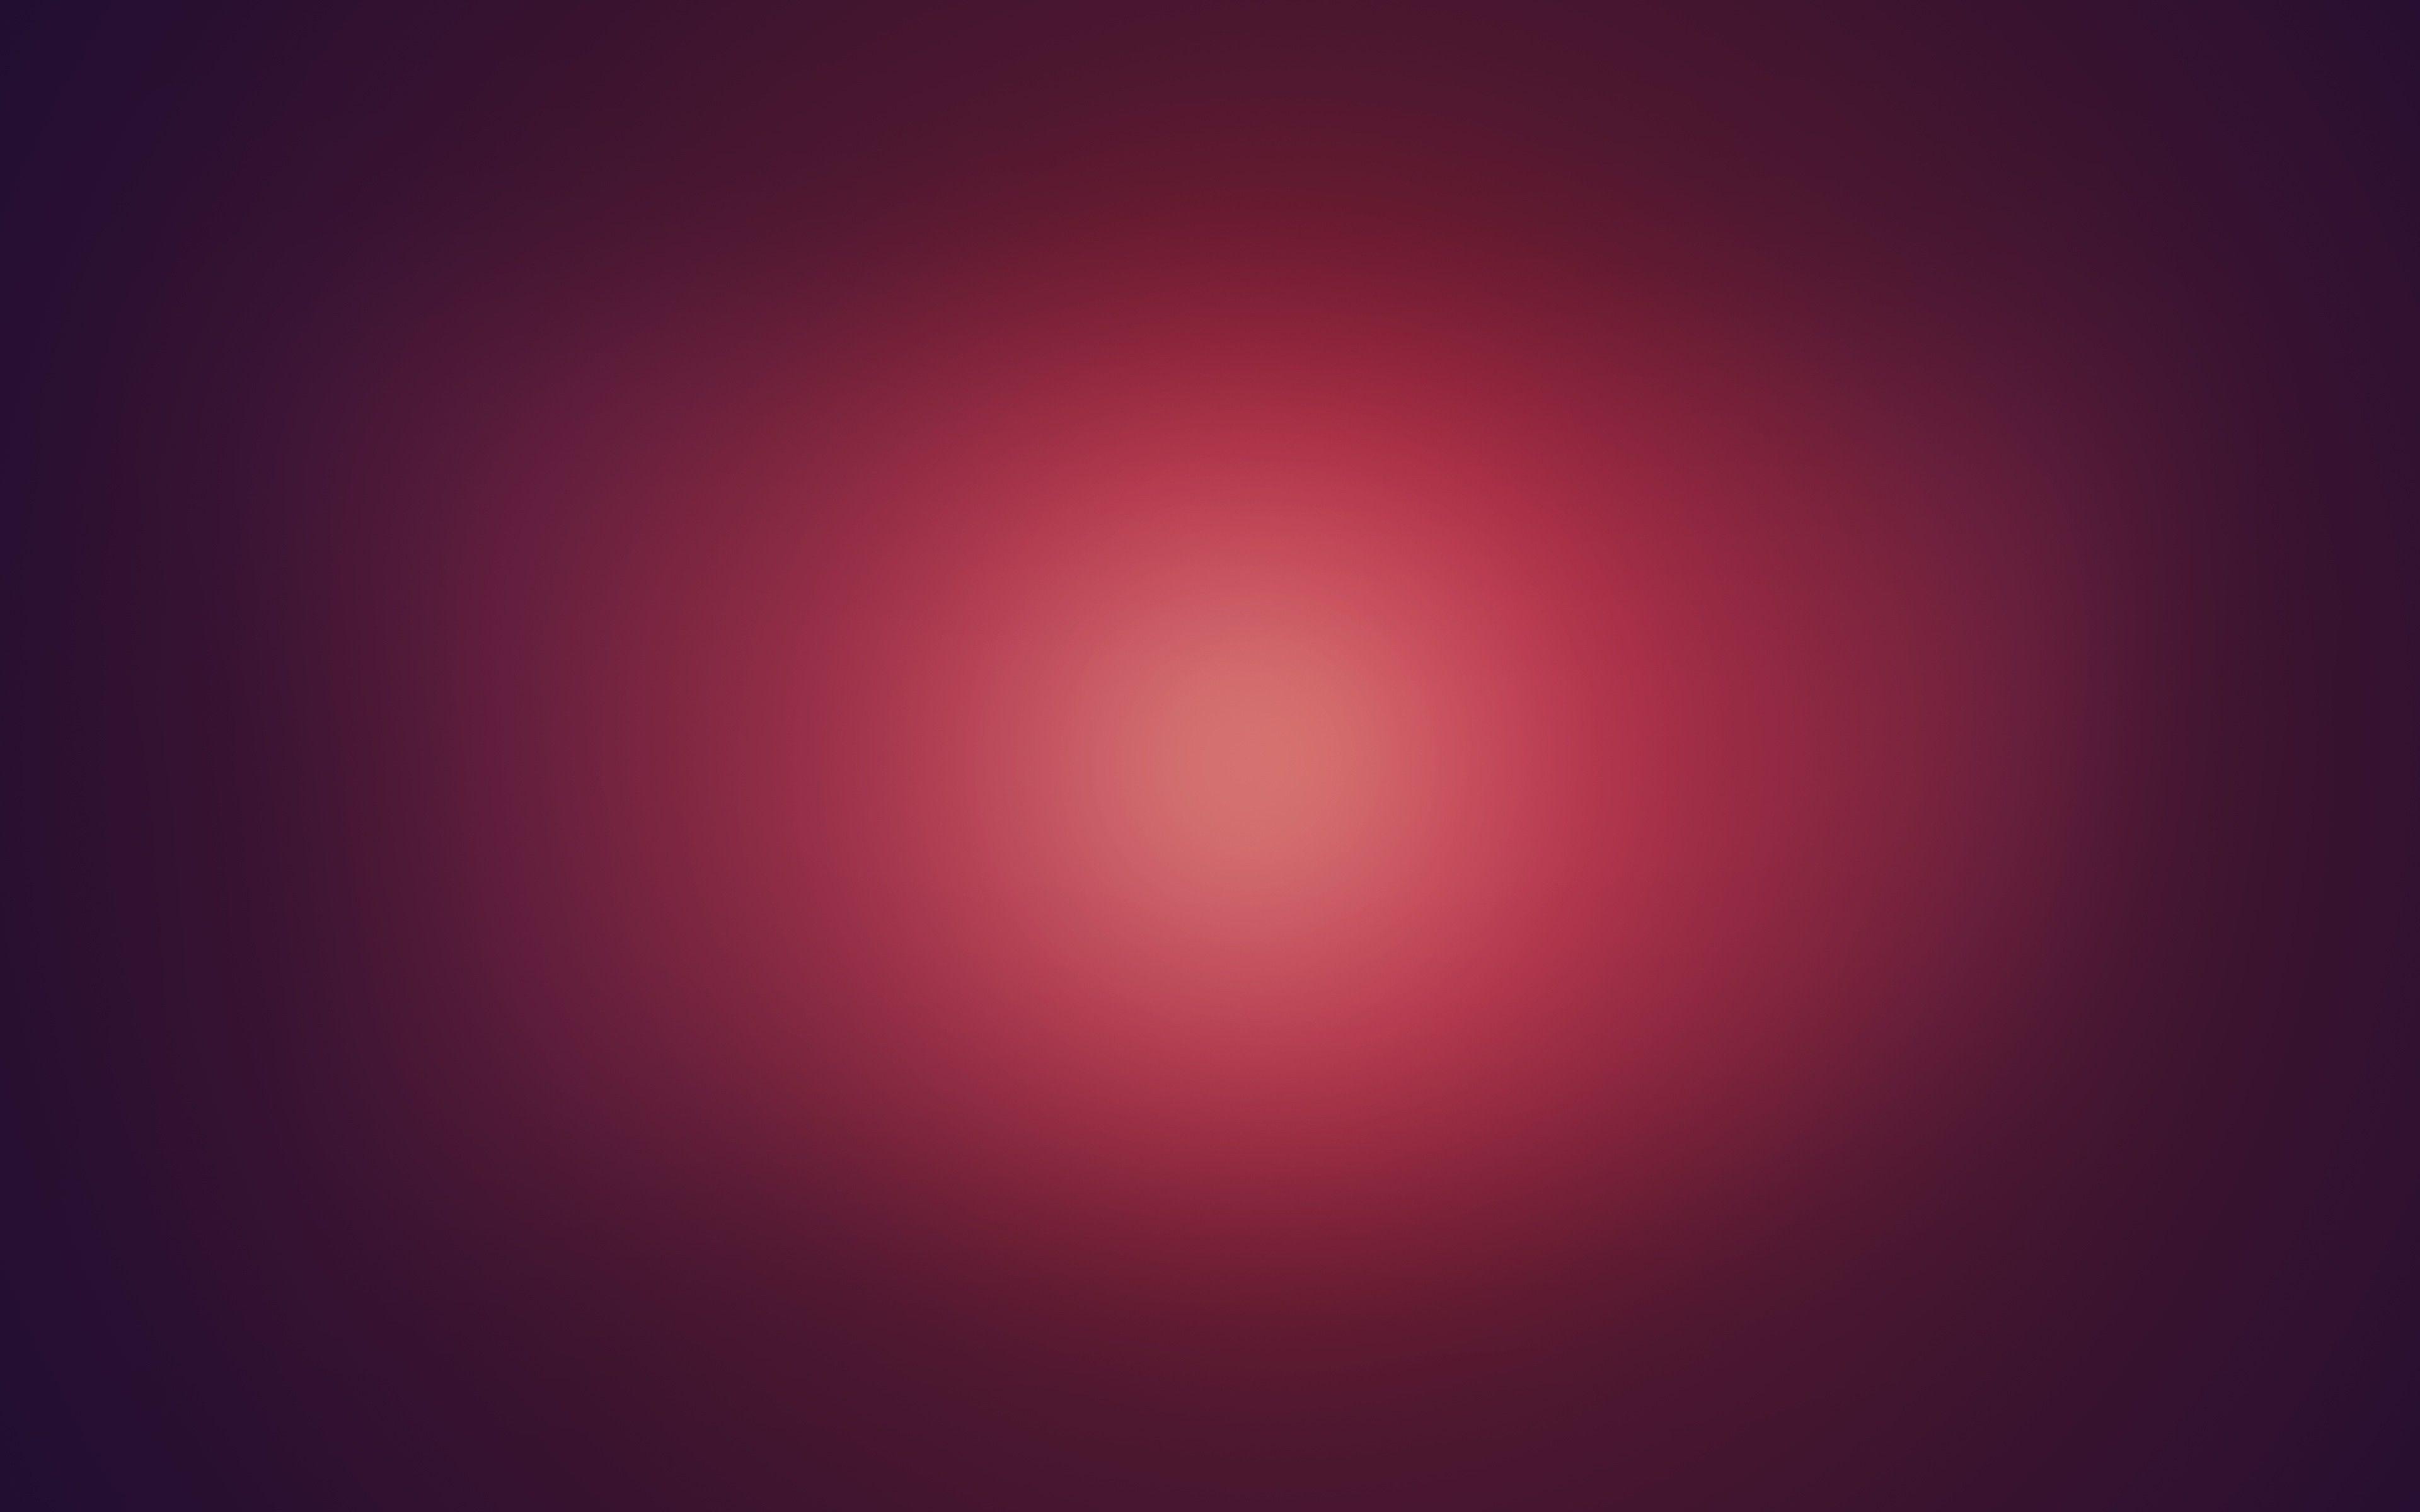 Shining in the center of the red gradient wallpaper and image